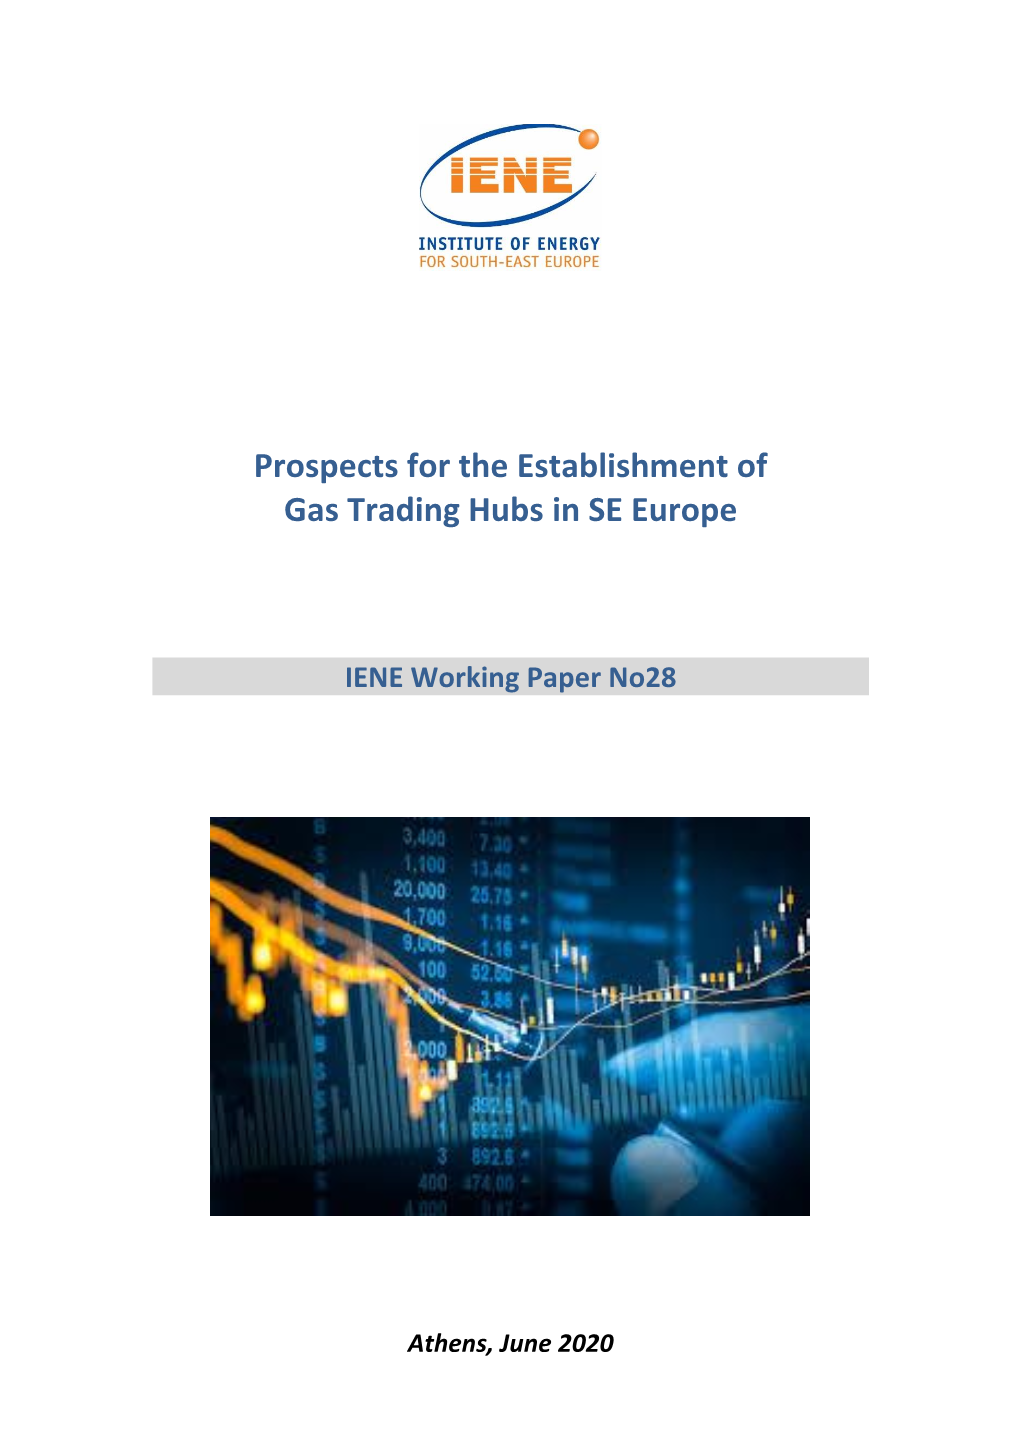 Prospects for the Establishment of Gas Trading Hubs in SE Europe